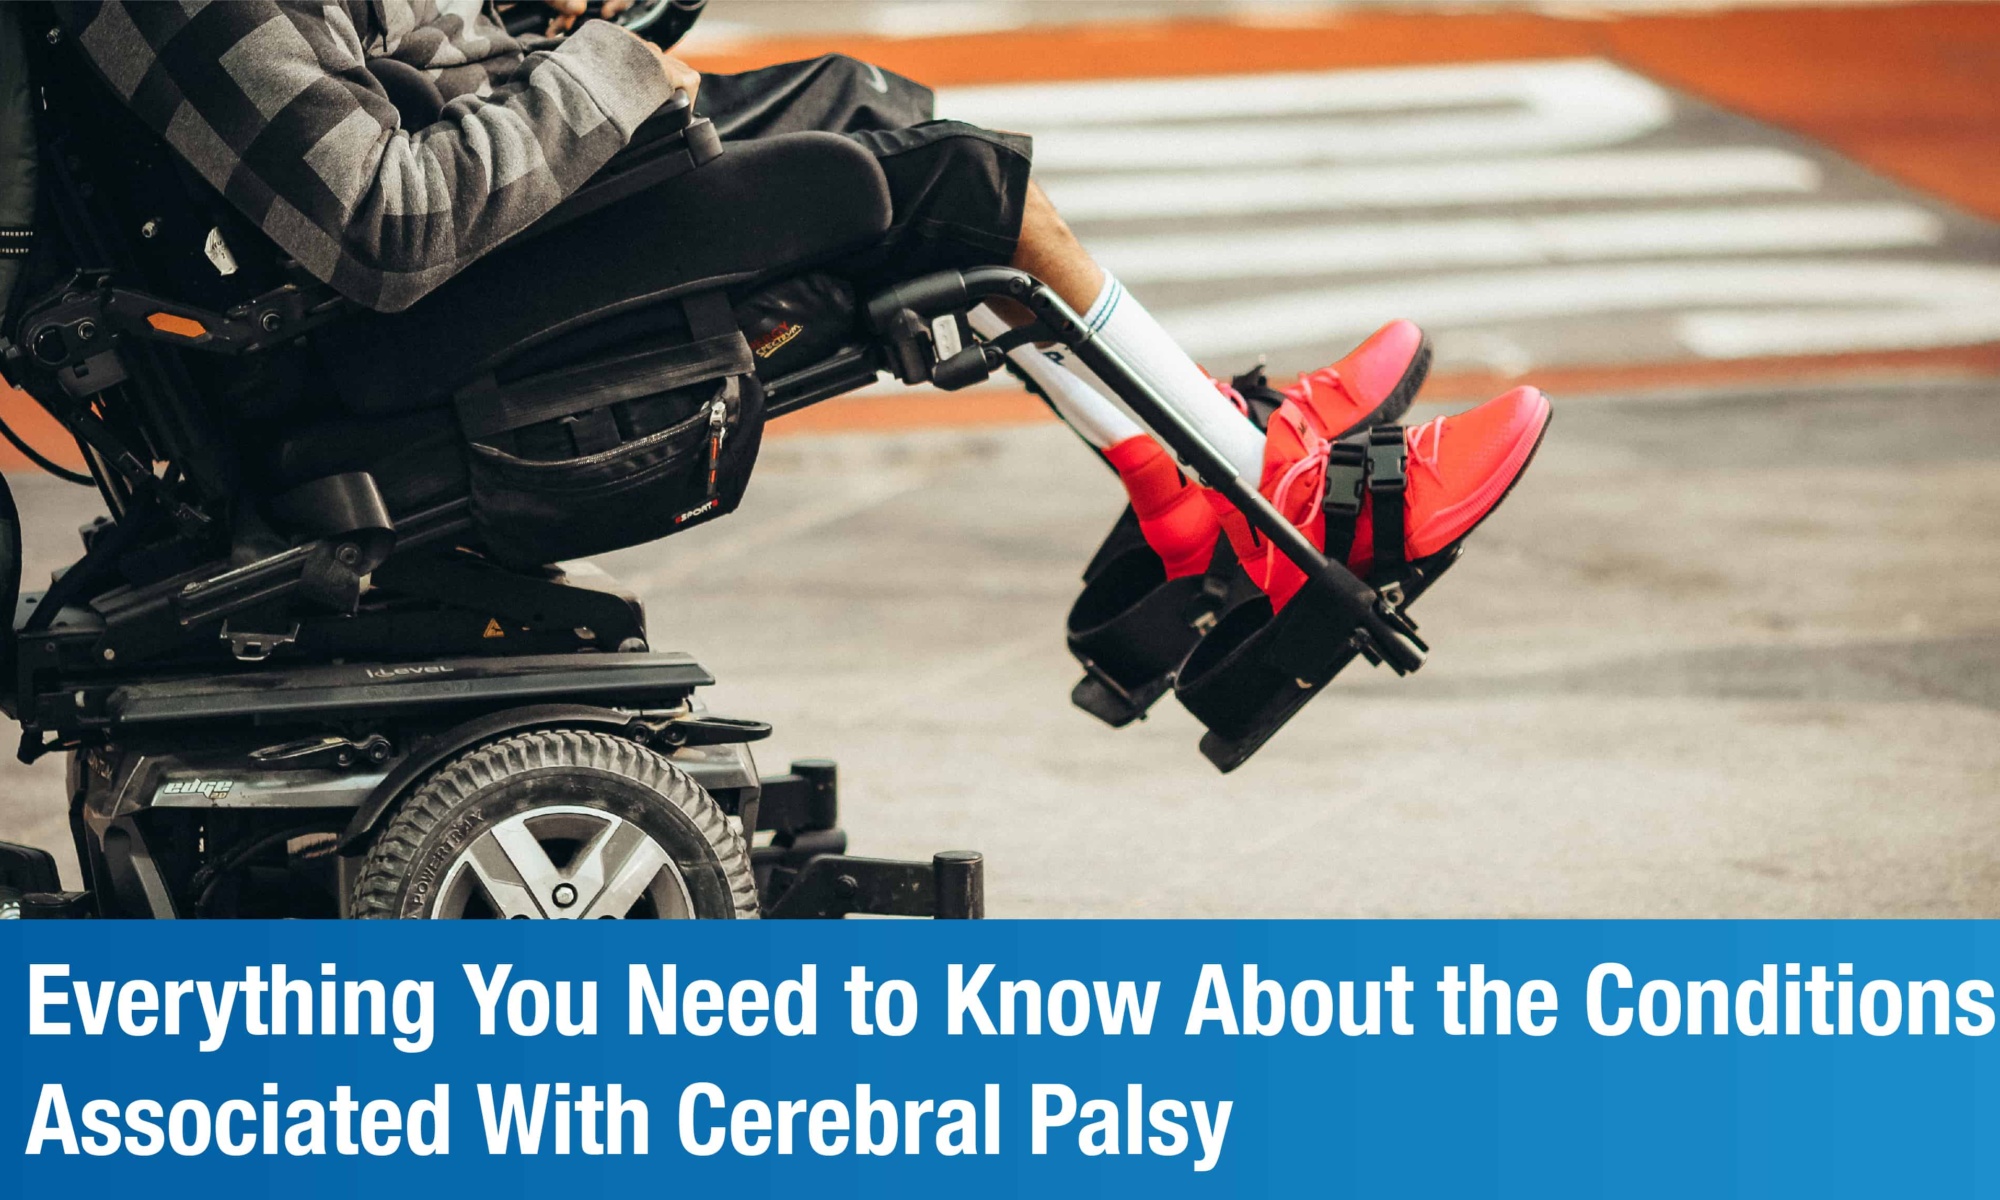 What Are the Conditions Associated With Cerebral Palsy?